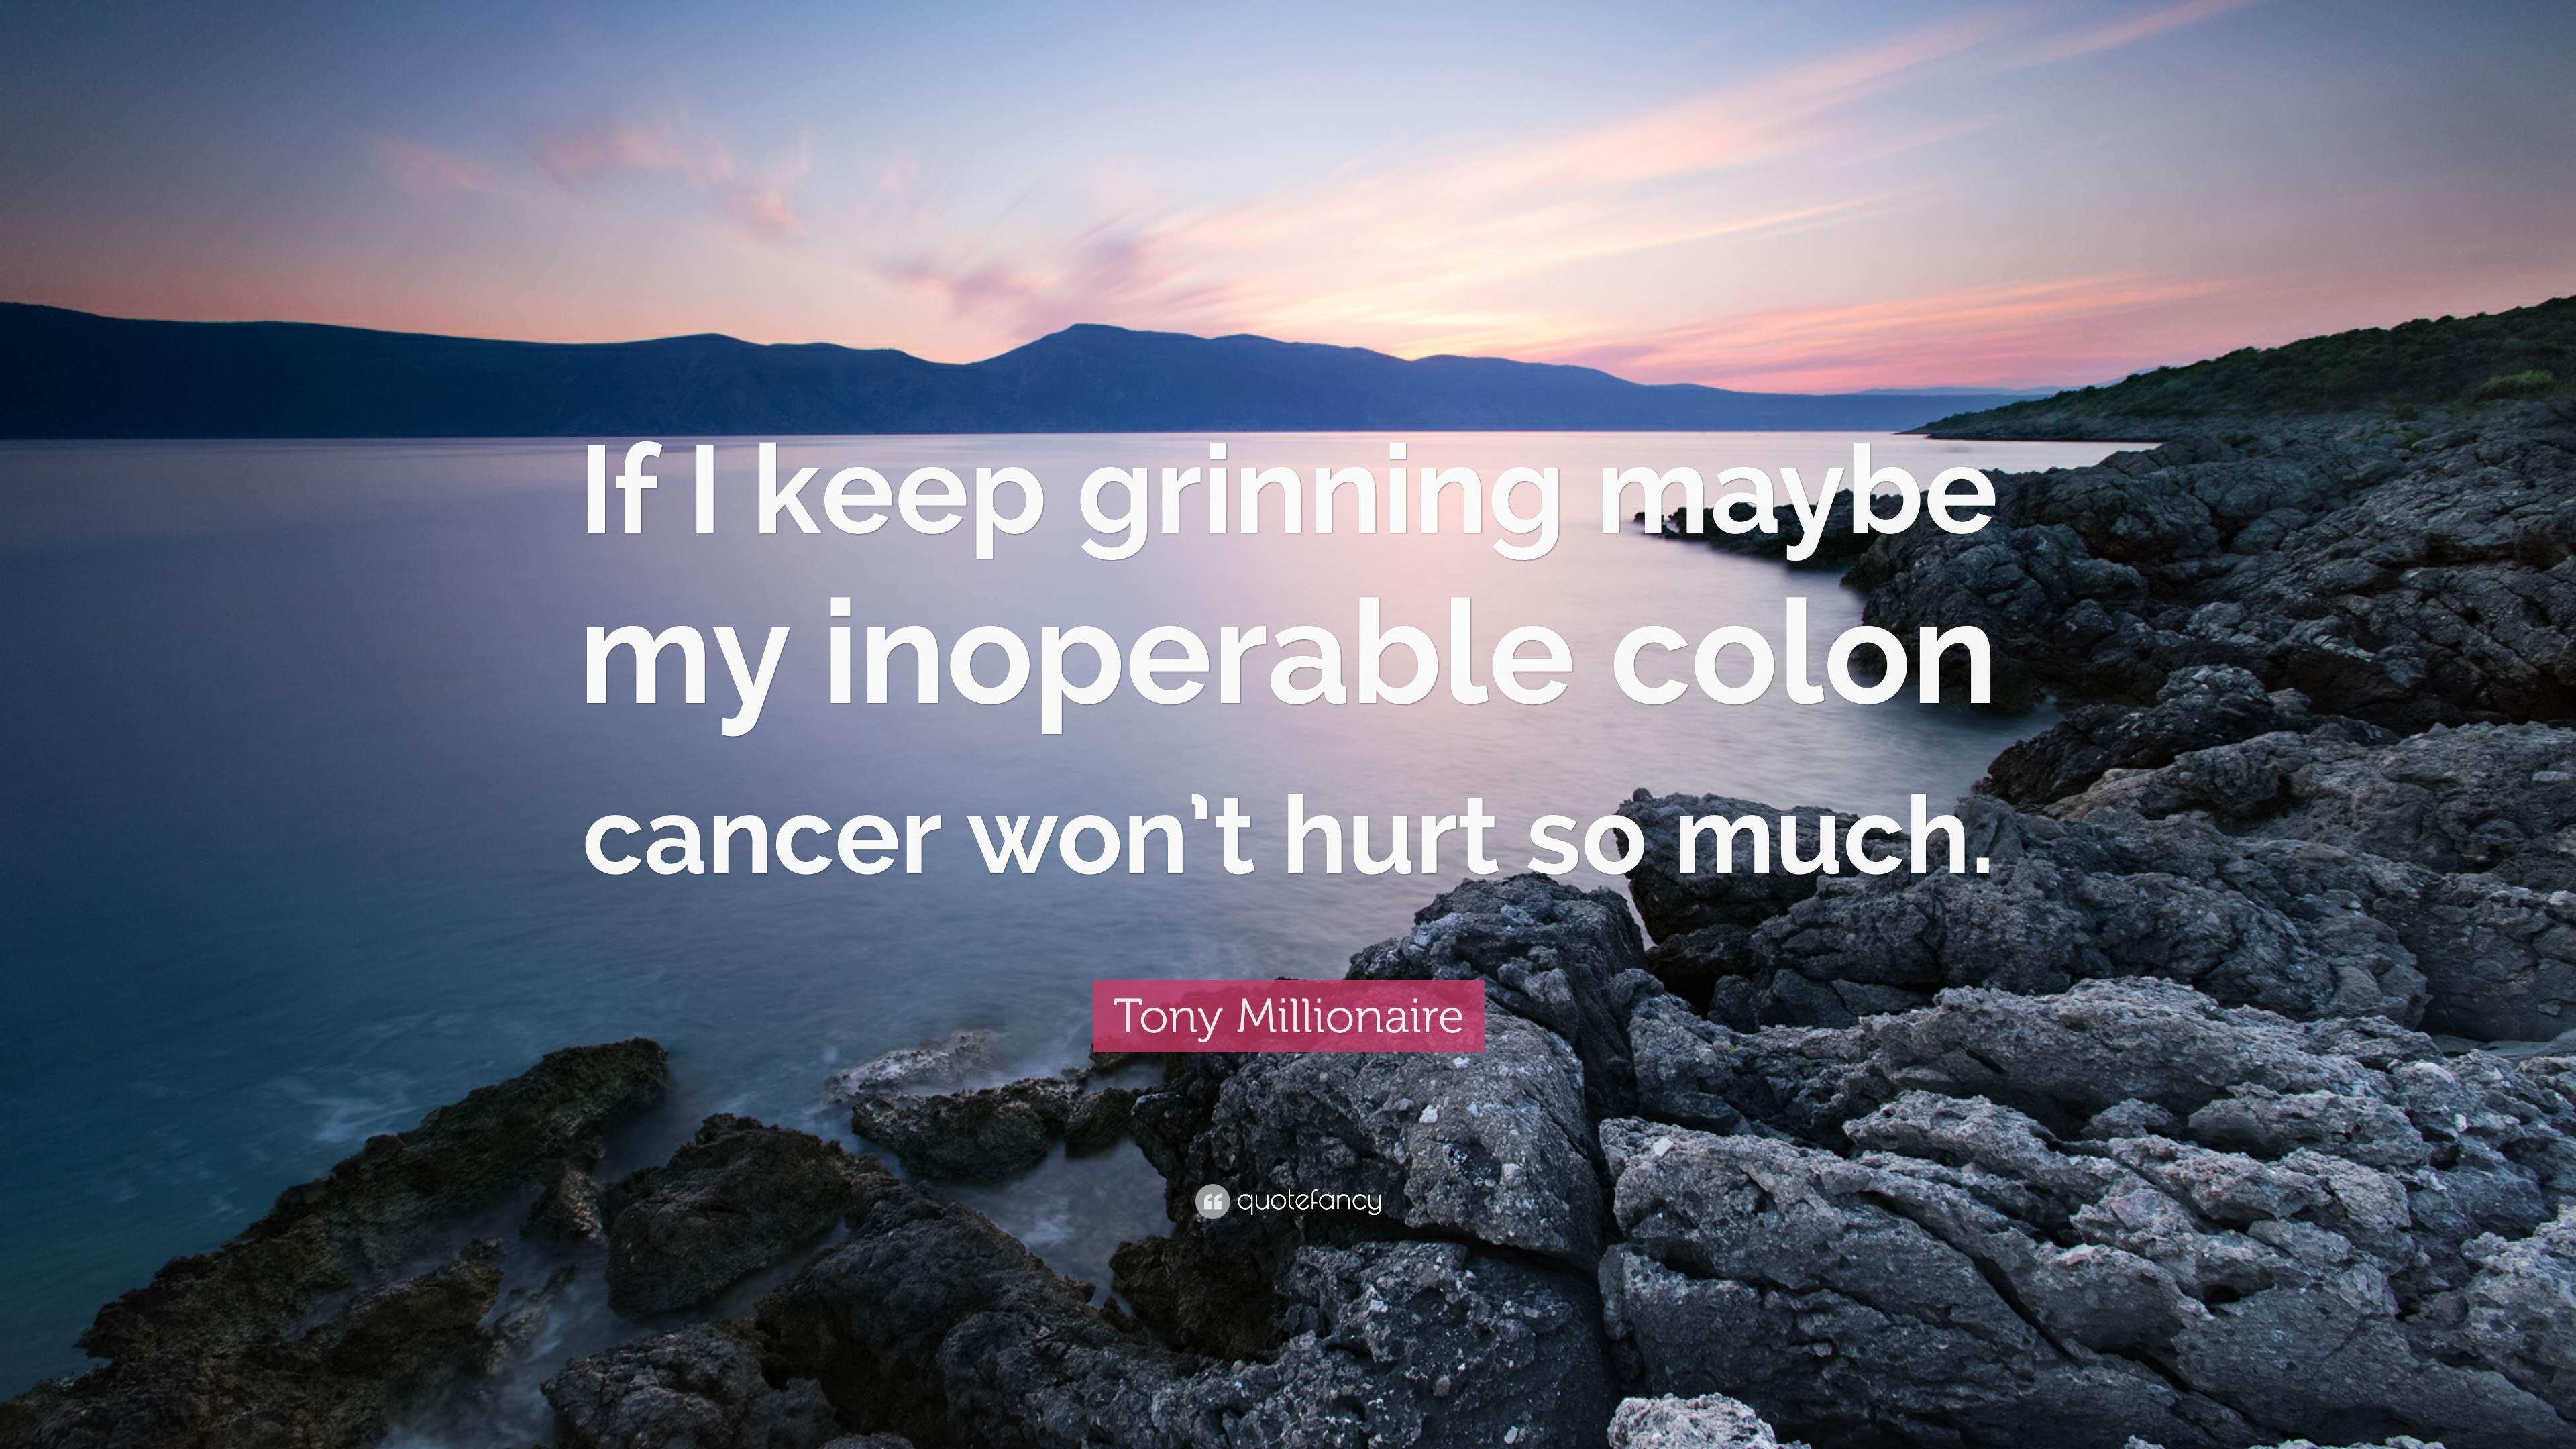 3840x2160 Tony Millionaire Quote: “If I keep grinning maybe my inoperable colon  cancer won'